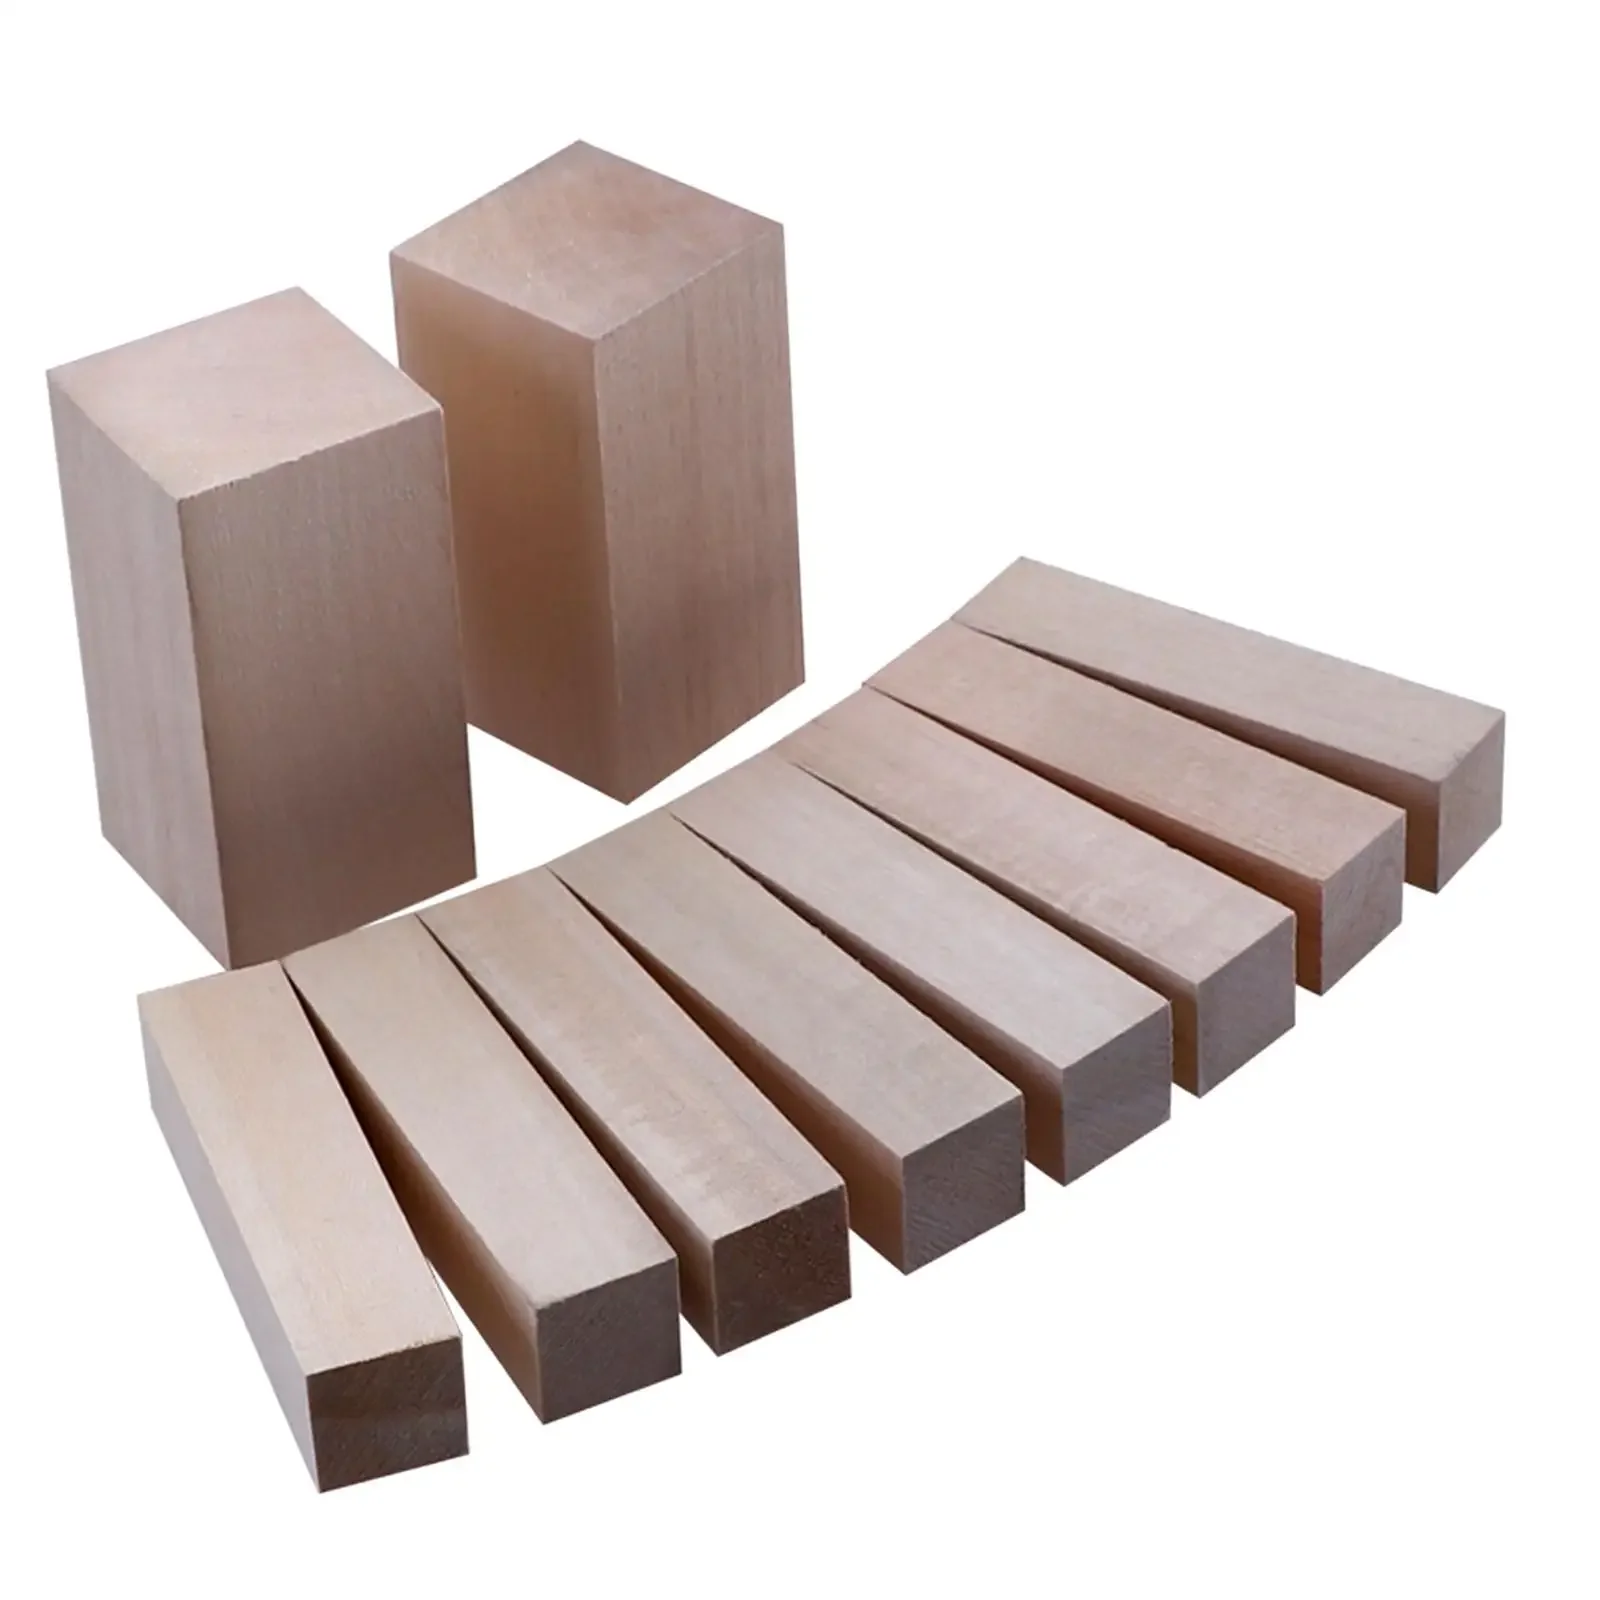 6 Pack Basswood Carving Blocks,Unfinished Wood Blocks Wood Carving Kit Wood  Blocks for Carving and Whittling